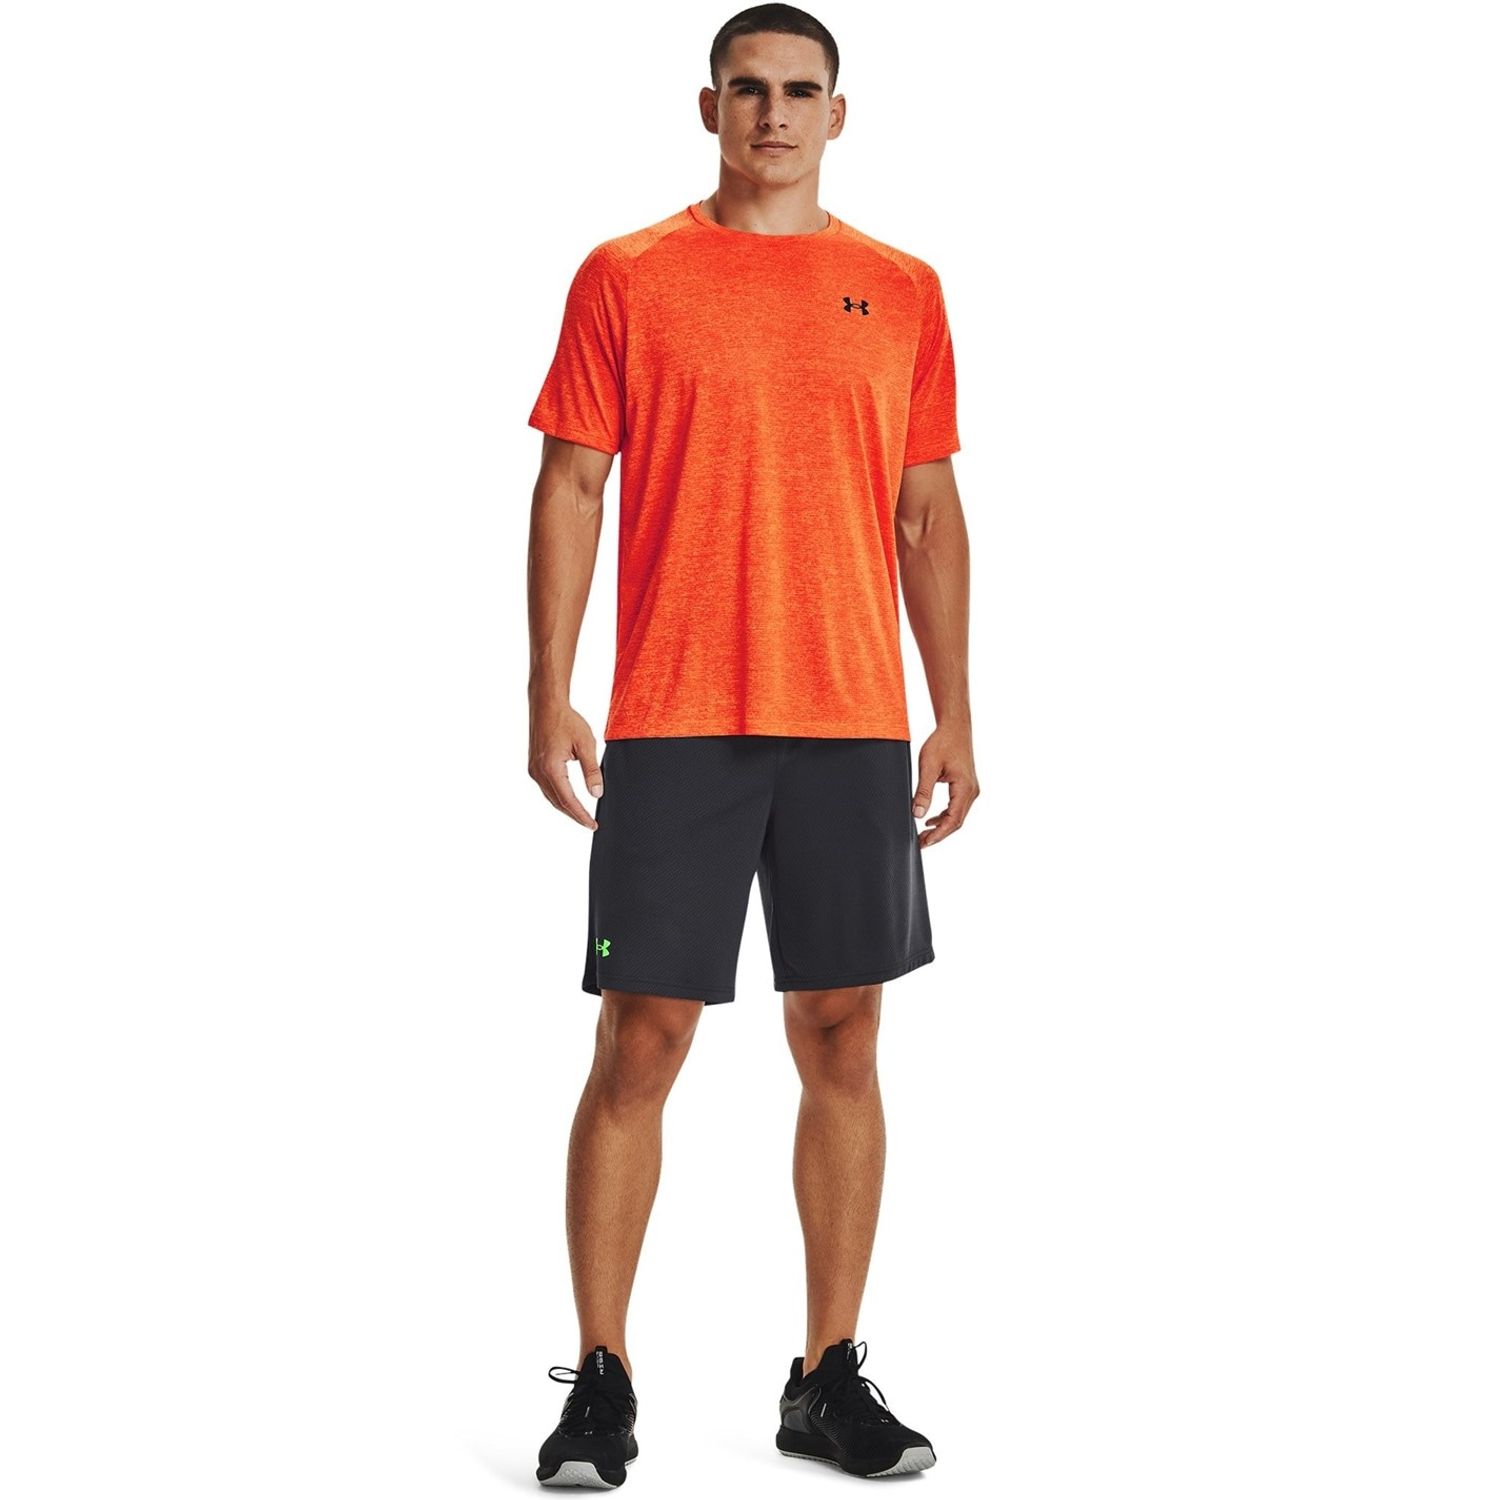 Grey Under Armour Tech Mesh Shorts Mens - Get The Label